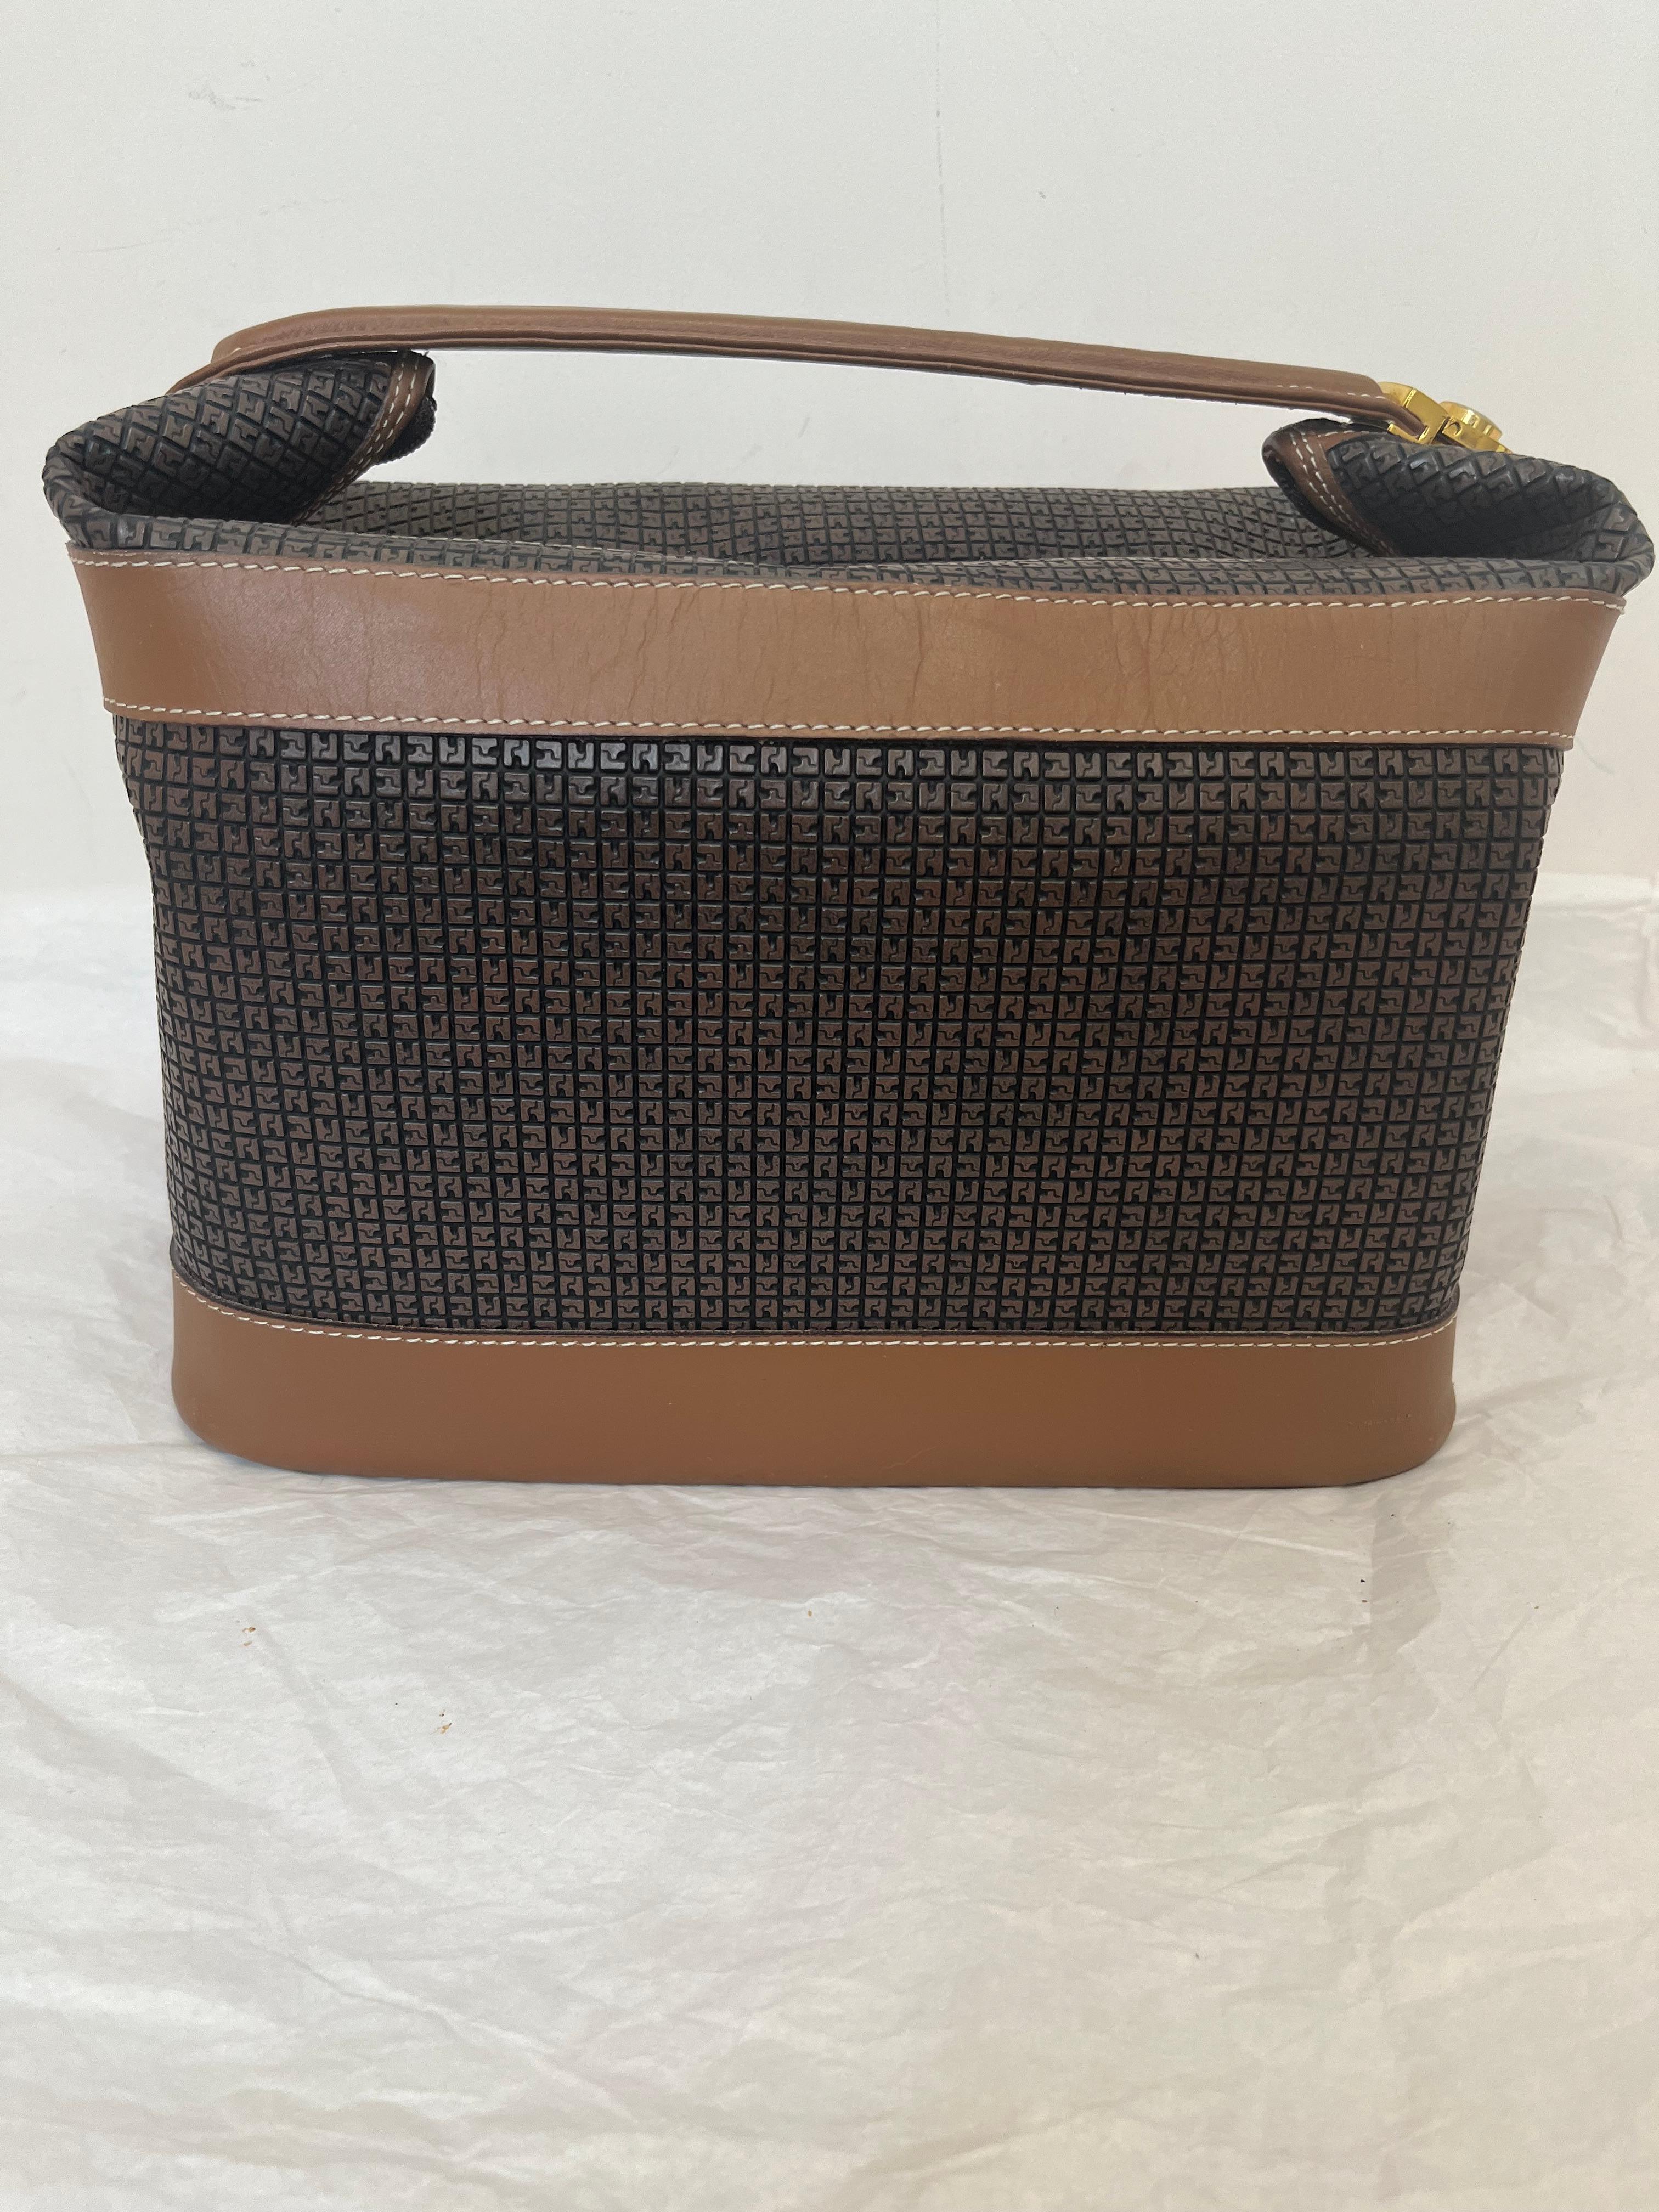 In great condition this vintage Ted Lapidus case can store your items, use it for cosmetics or it makes an excellent travel case.
Ted Lapidus was a well known French designer who, in the 60s, designed a bag for the Beatles. Oliver, his son, is now